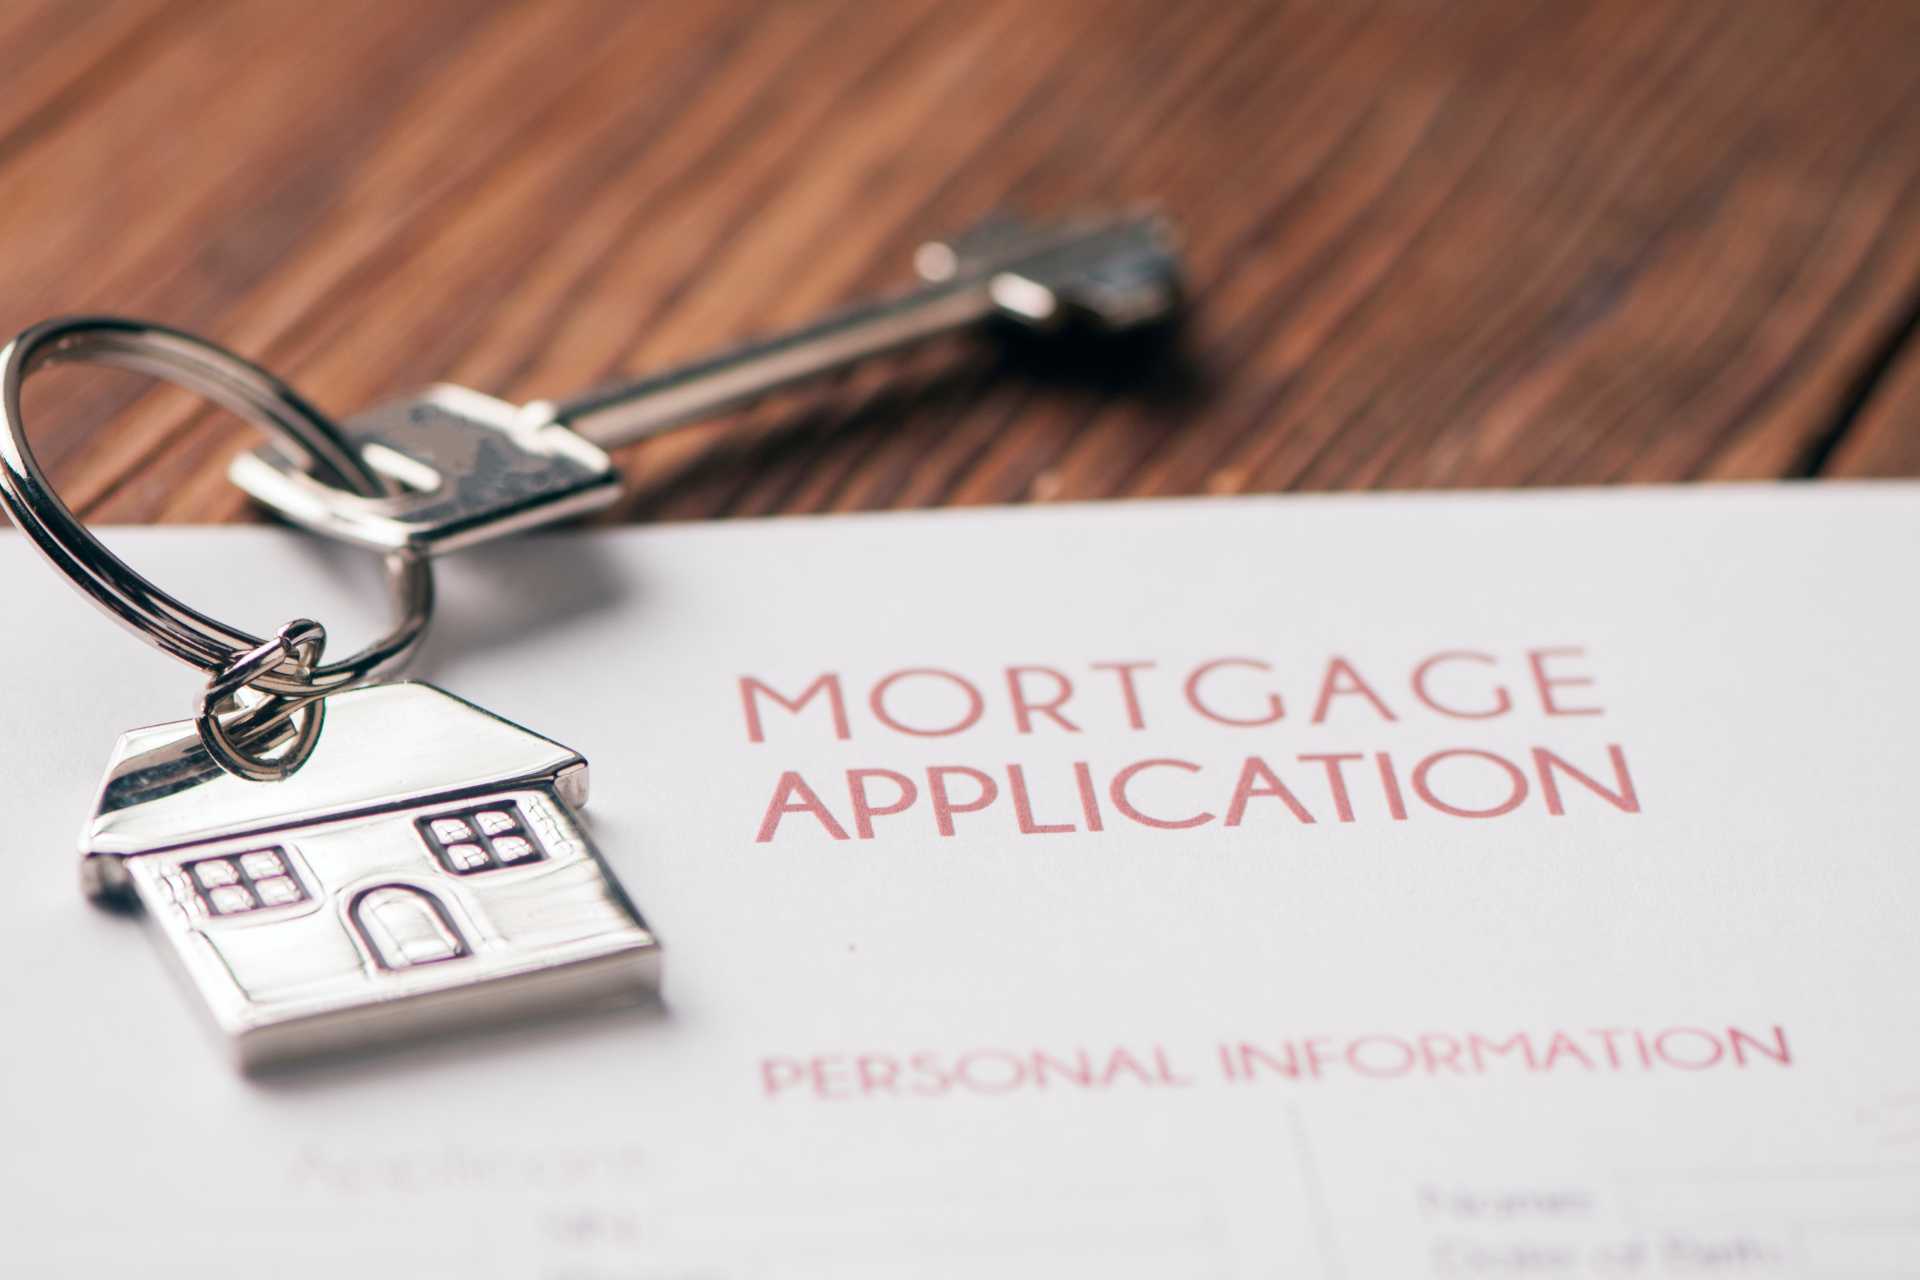 5 Common Mistakes to Avoid When Applying for a Mortgage